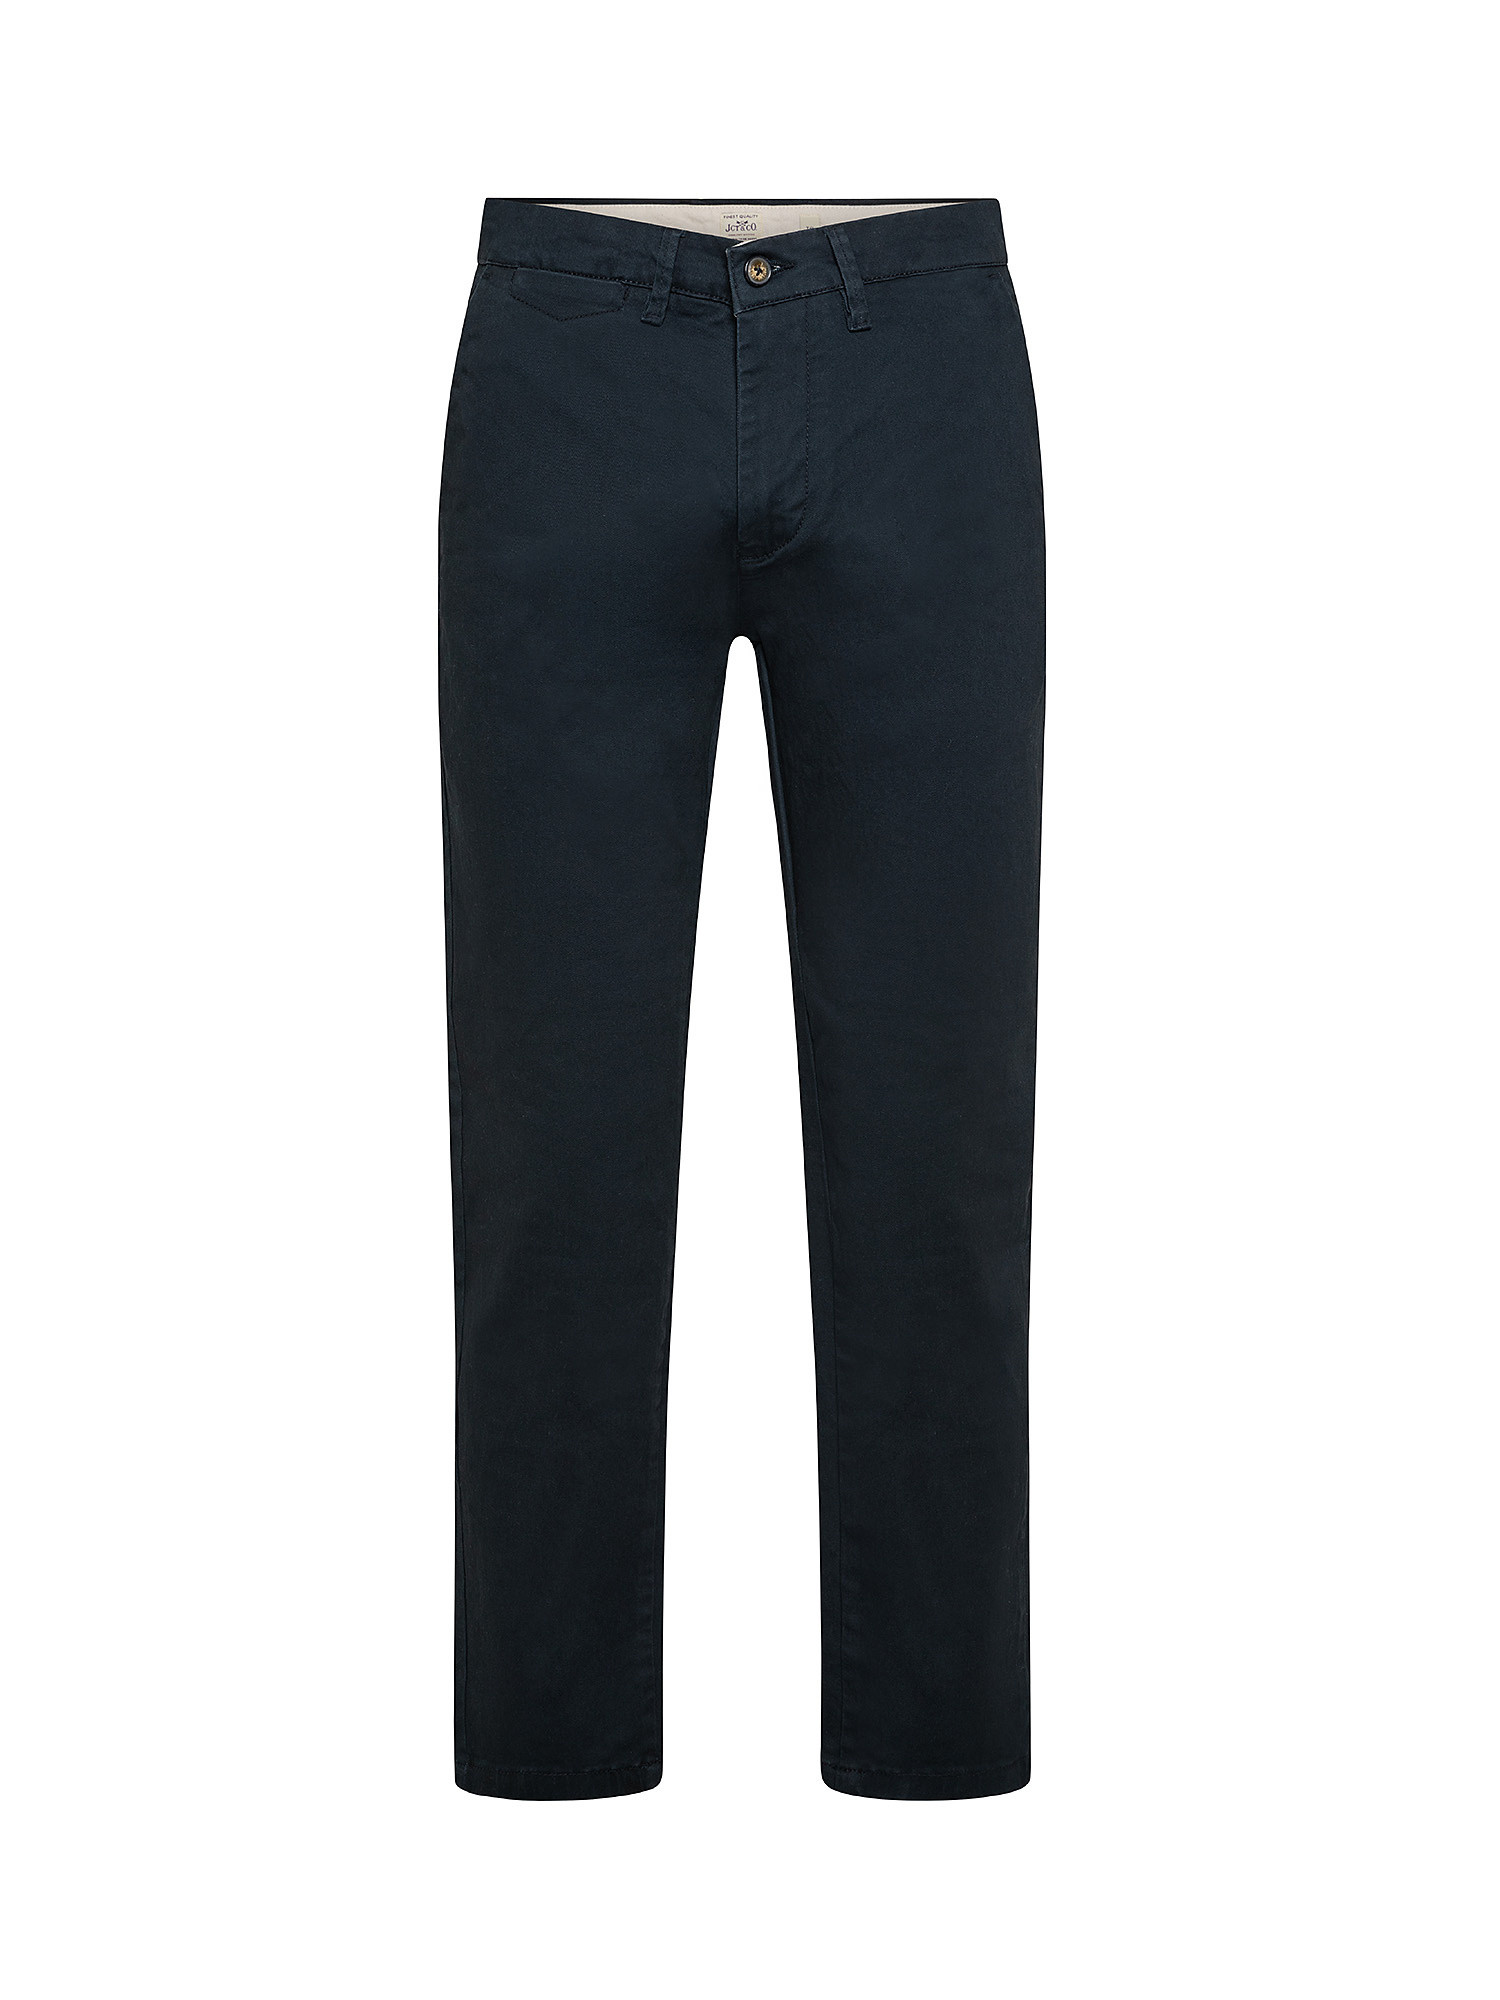 Pantalone chinos in cotone stretch, Blu scuro, large image number 0